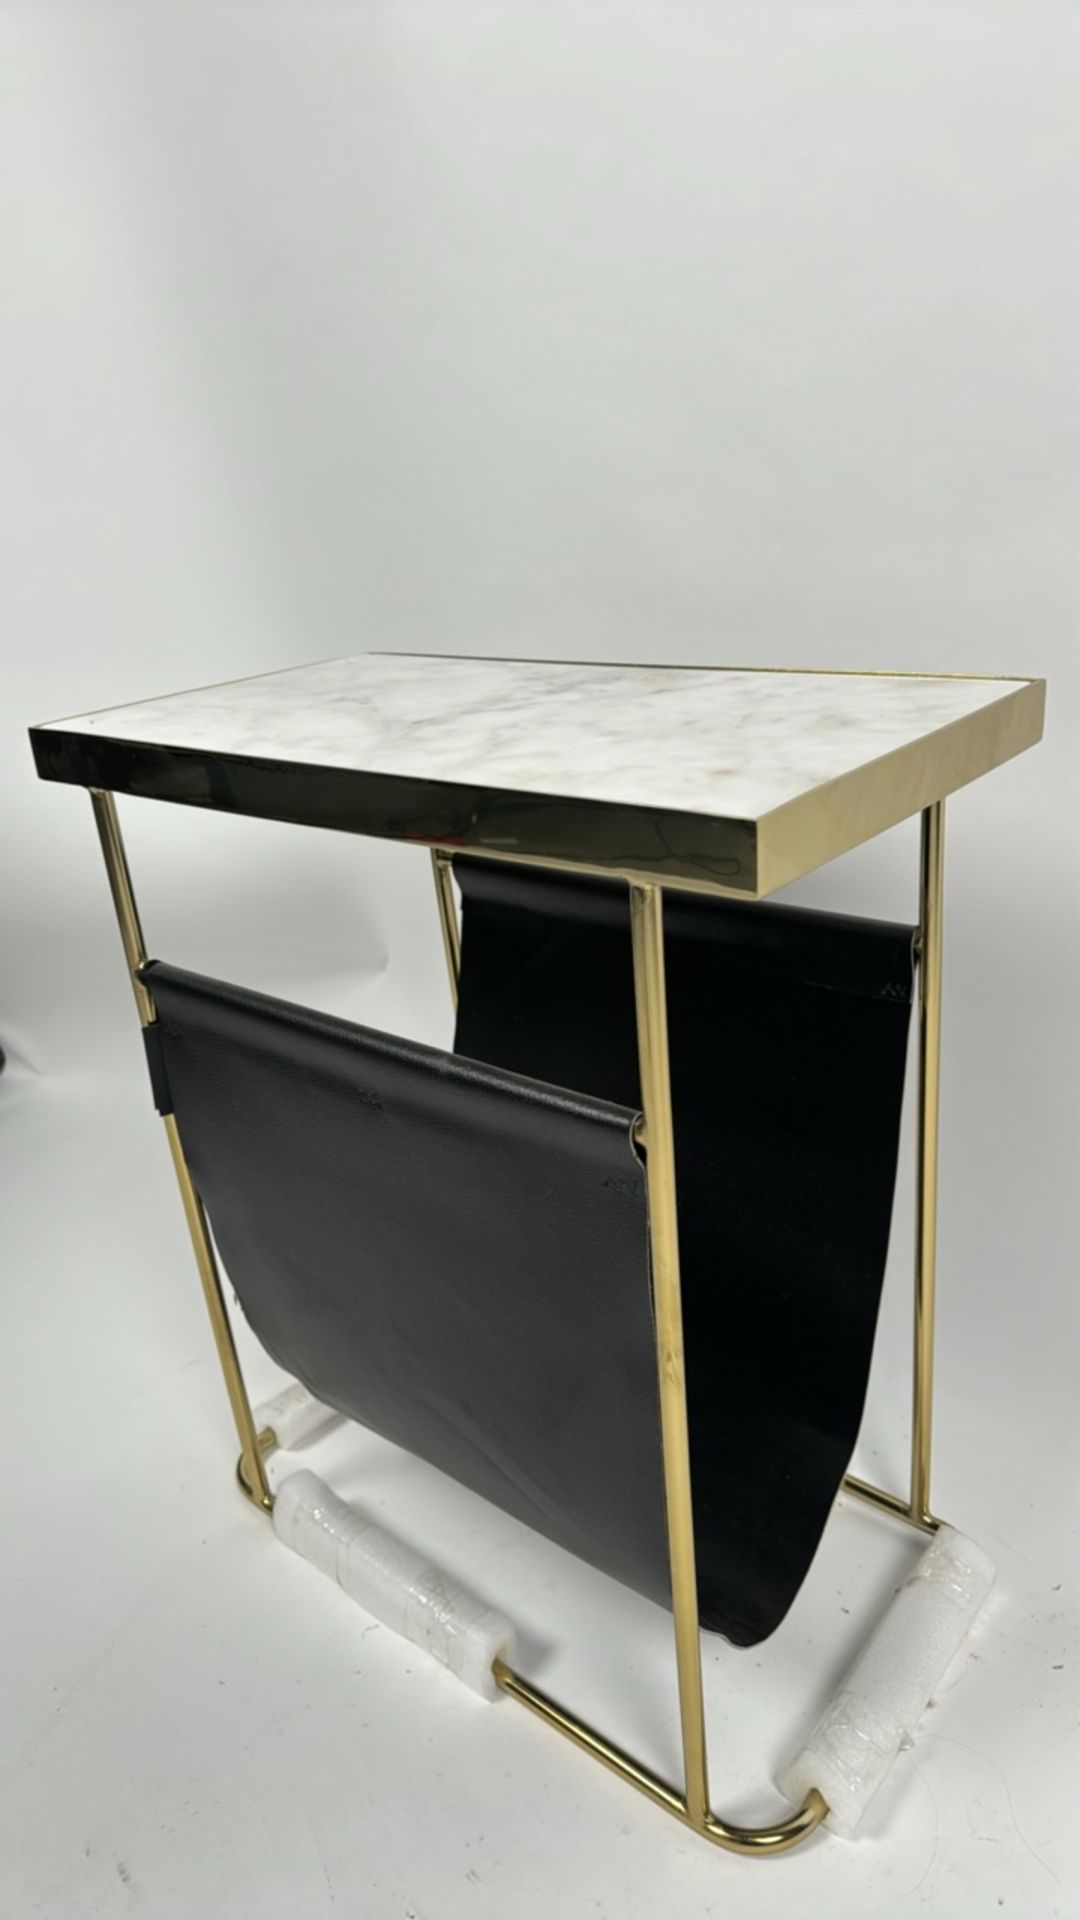 Amara Leather & Marble Side Table - Image 4 of 4